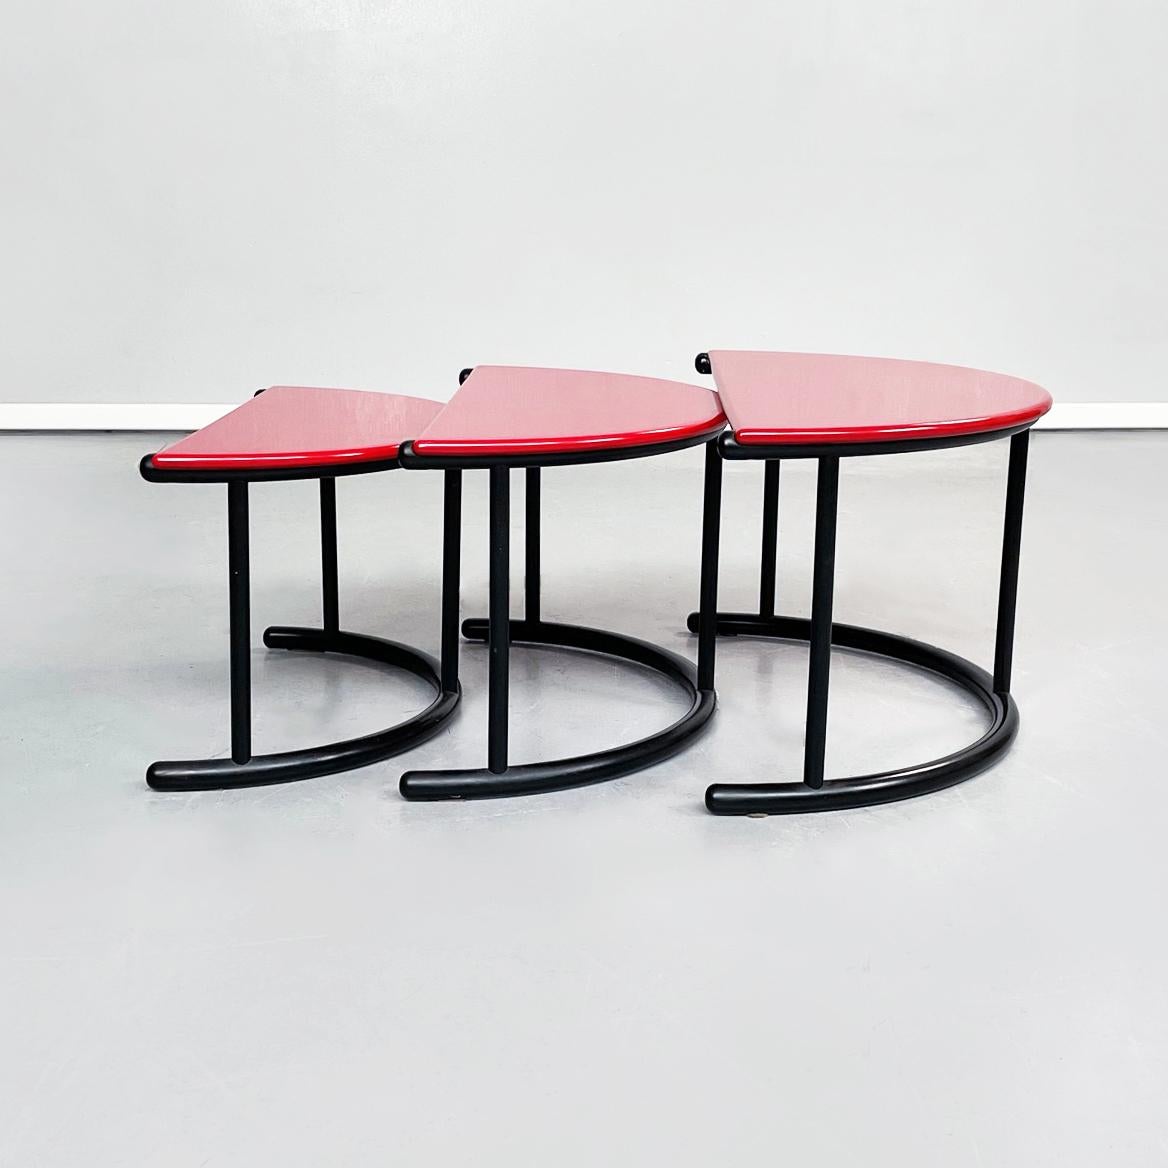 Italian mid-century Trio of coffee tables Tria by Frattini Morphos Acerbis, 1980s.
Trio of coffee tables Tria in the shape of a semicircle. The red lacquered wooden top is supported by a black painted wooden tubular structure.
Produced by Morphos